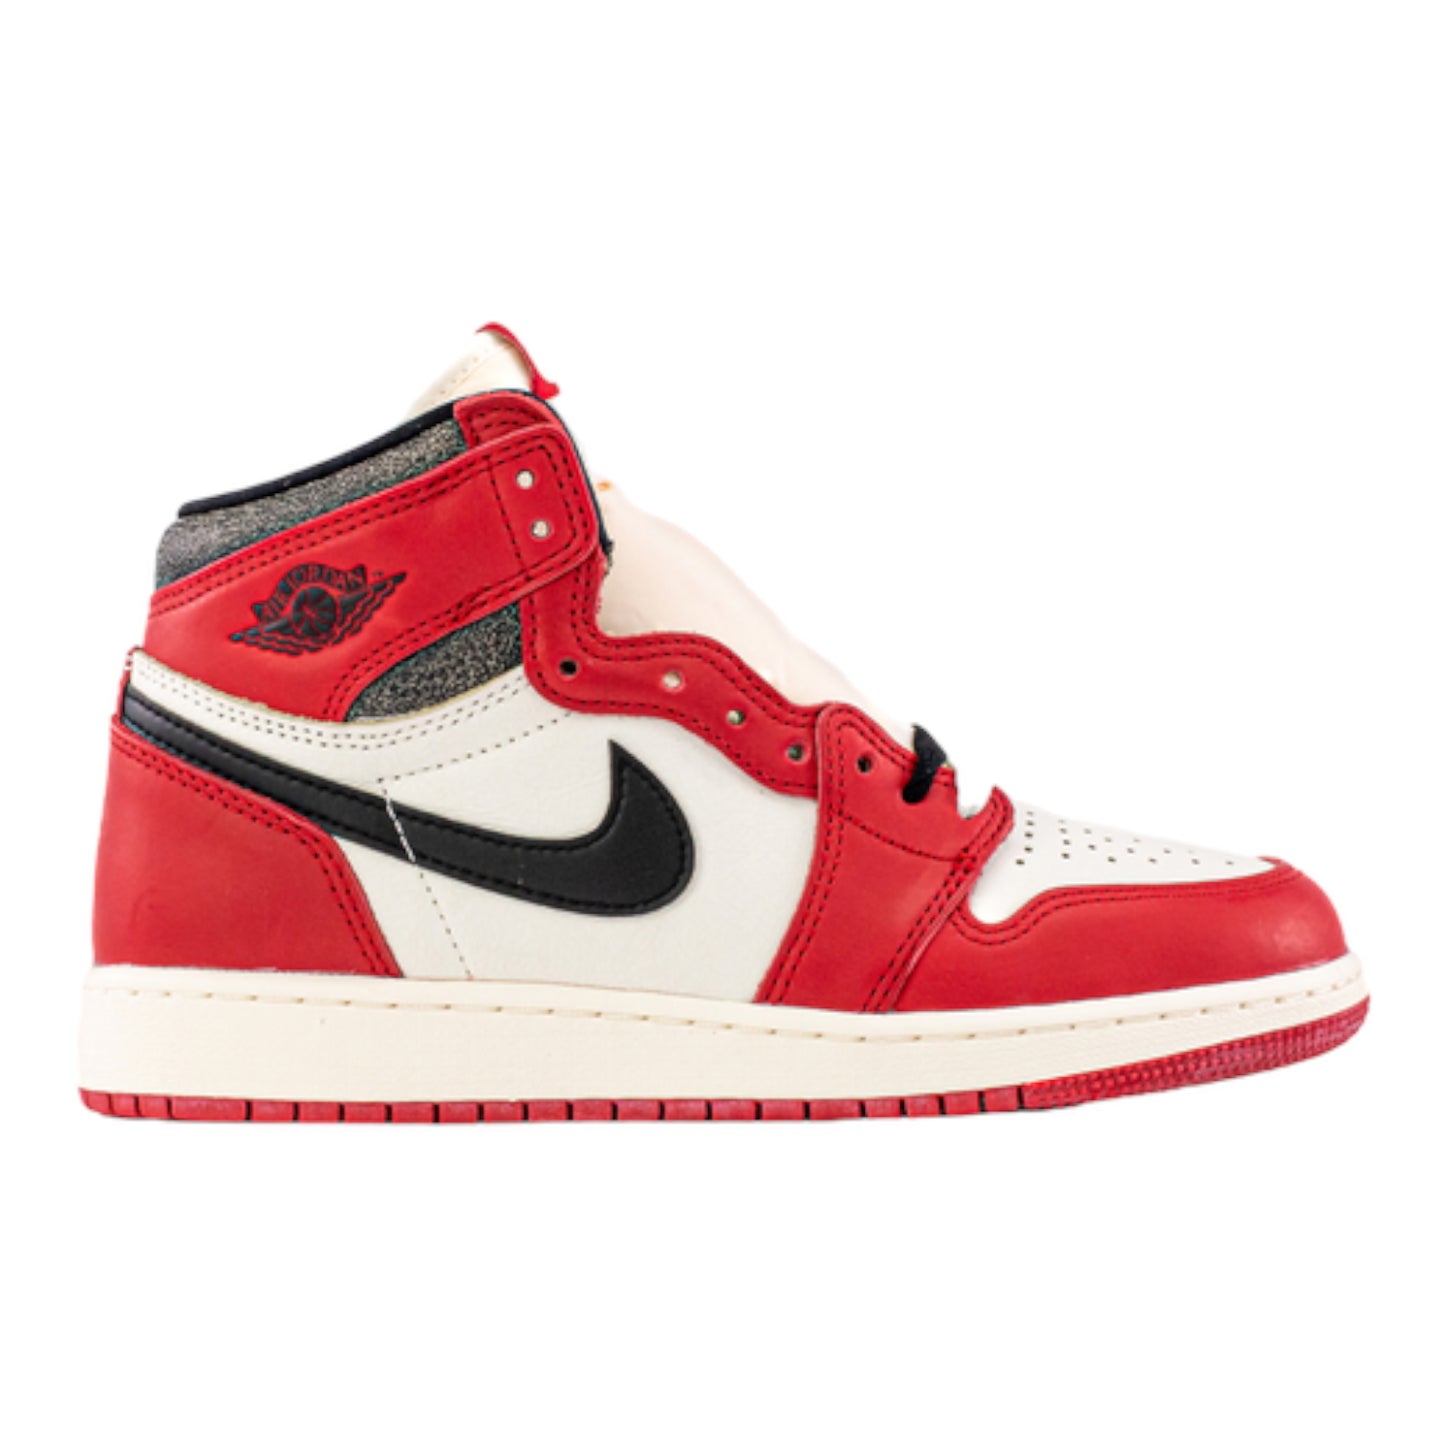 Jordan 1 Retro High OG 'Chicago Lost and Found' (GS)